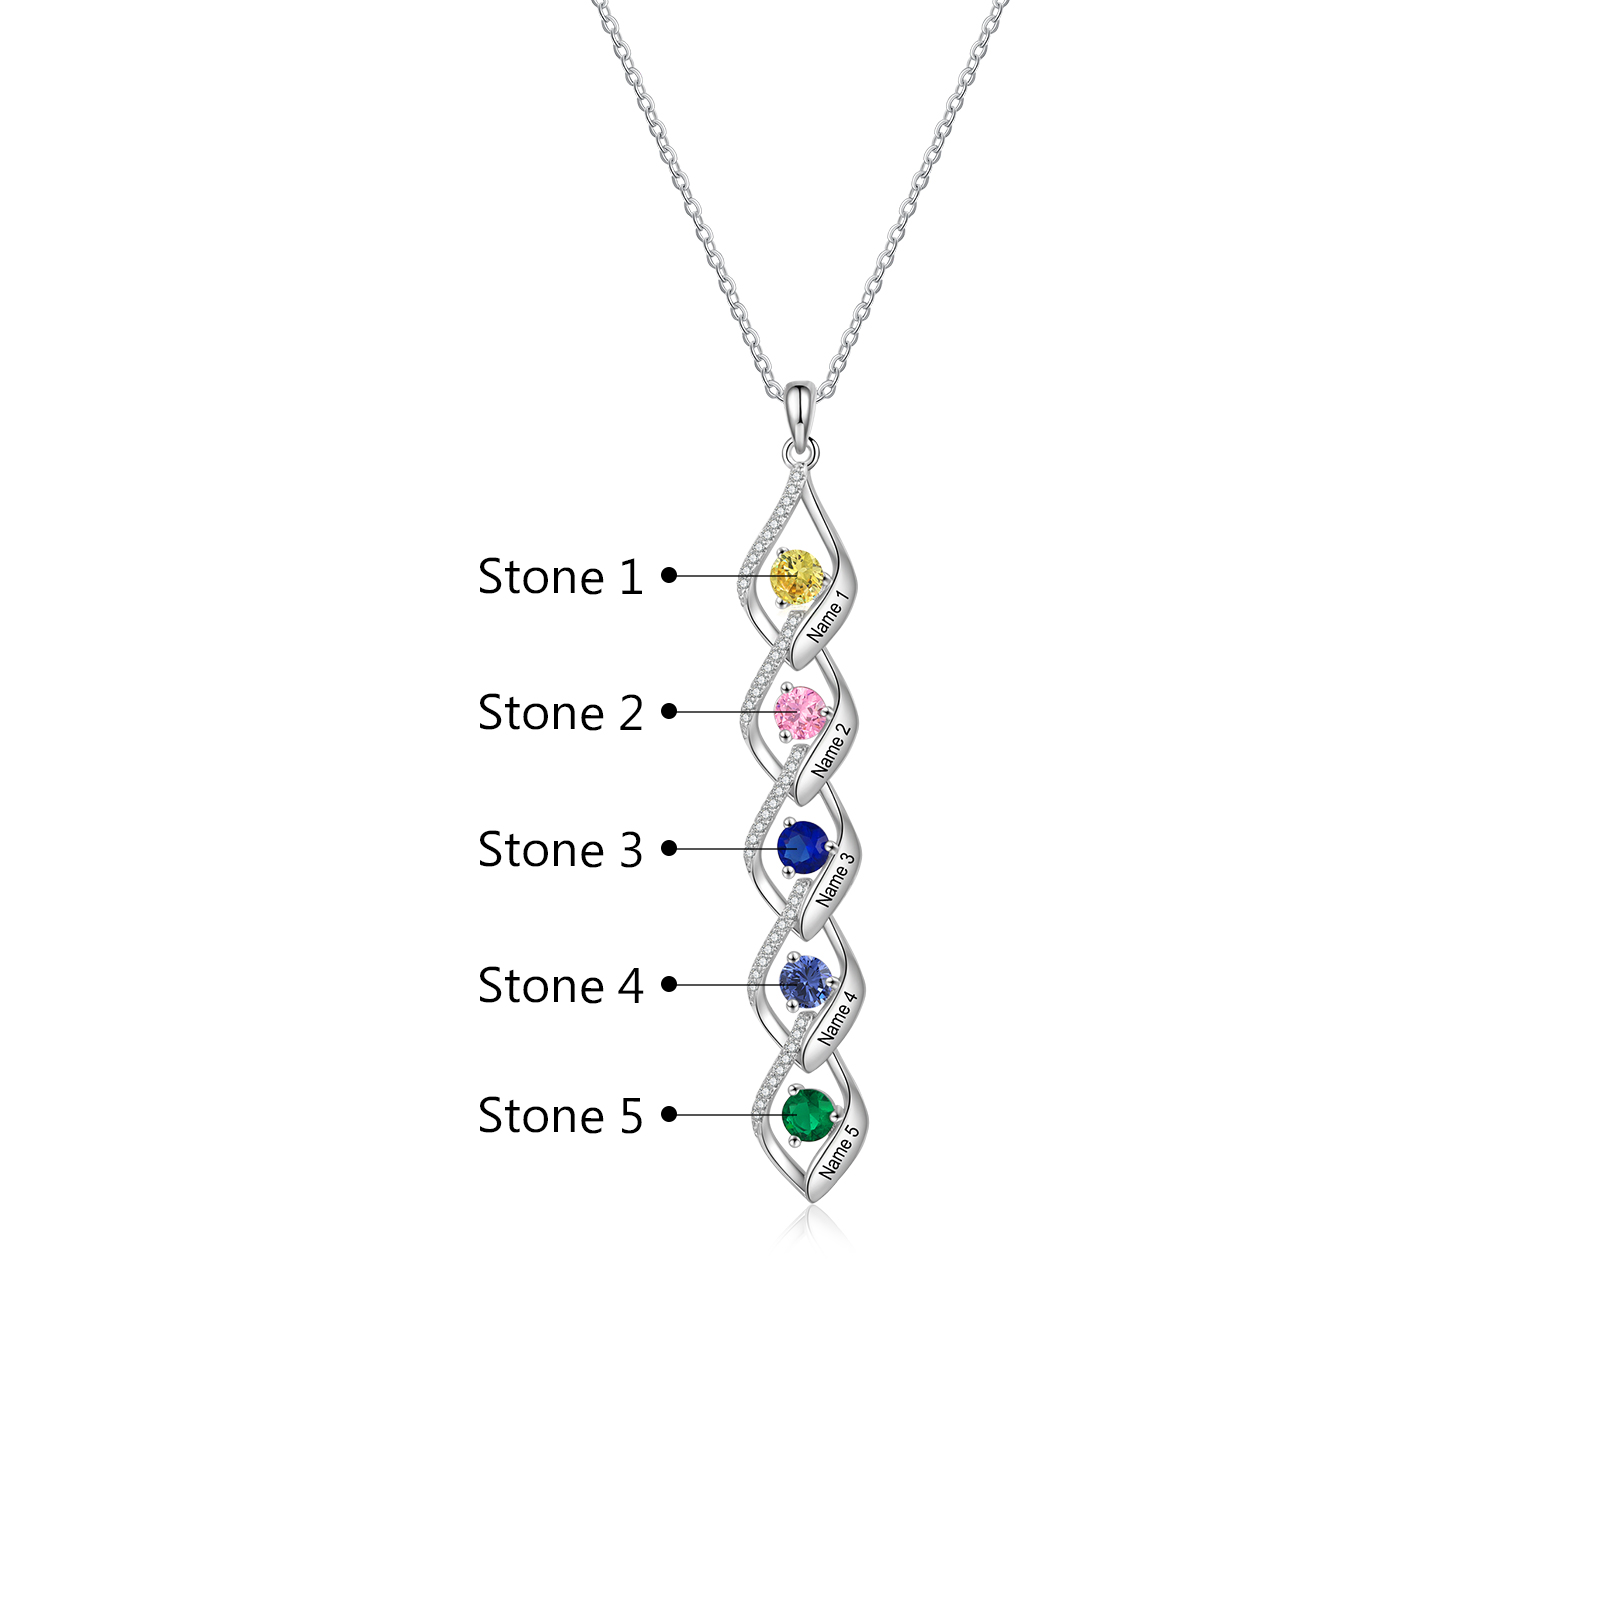 5 Names - Personalized Necklace Custom Birthstone Necklace Engraved with Name A special Gift For Mom/Grandma